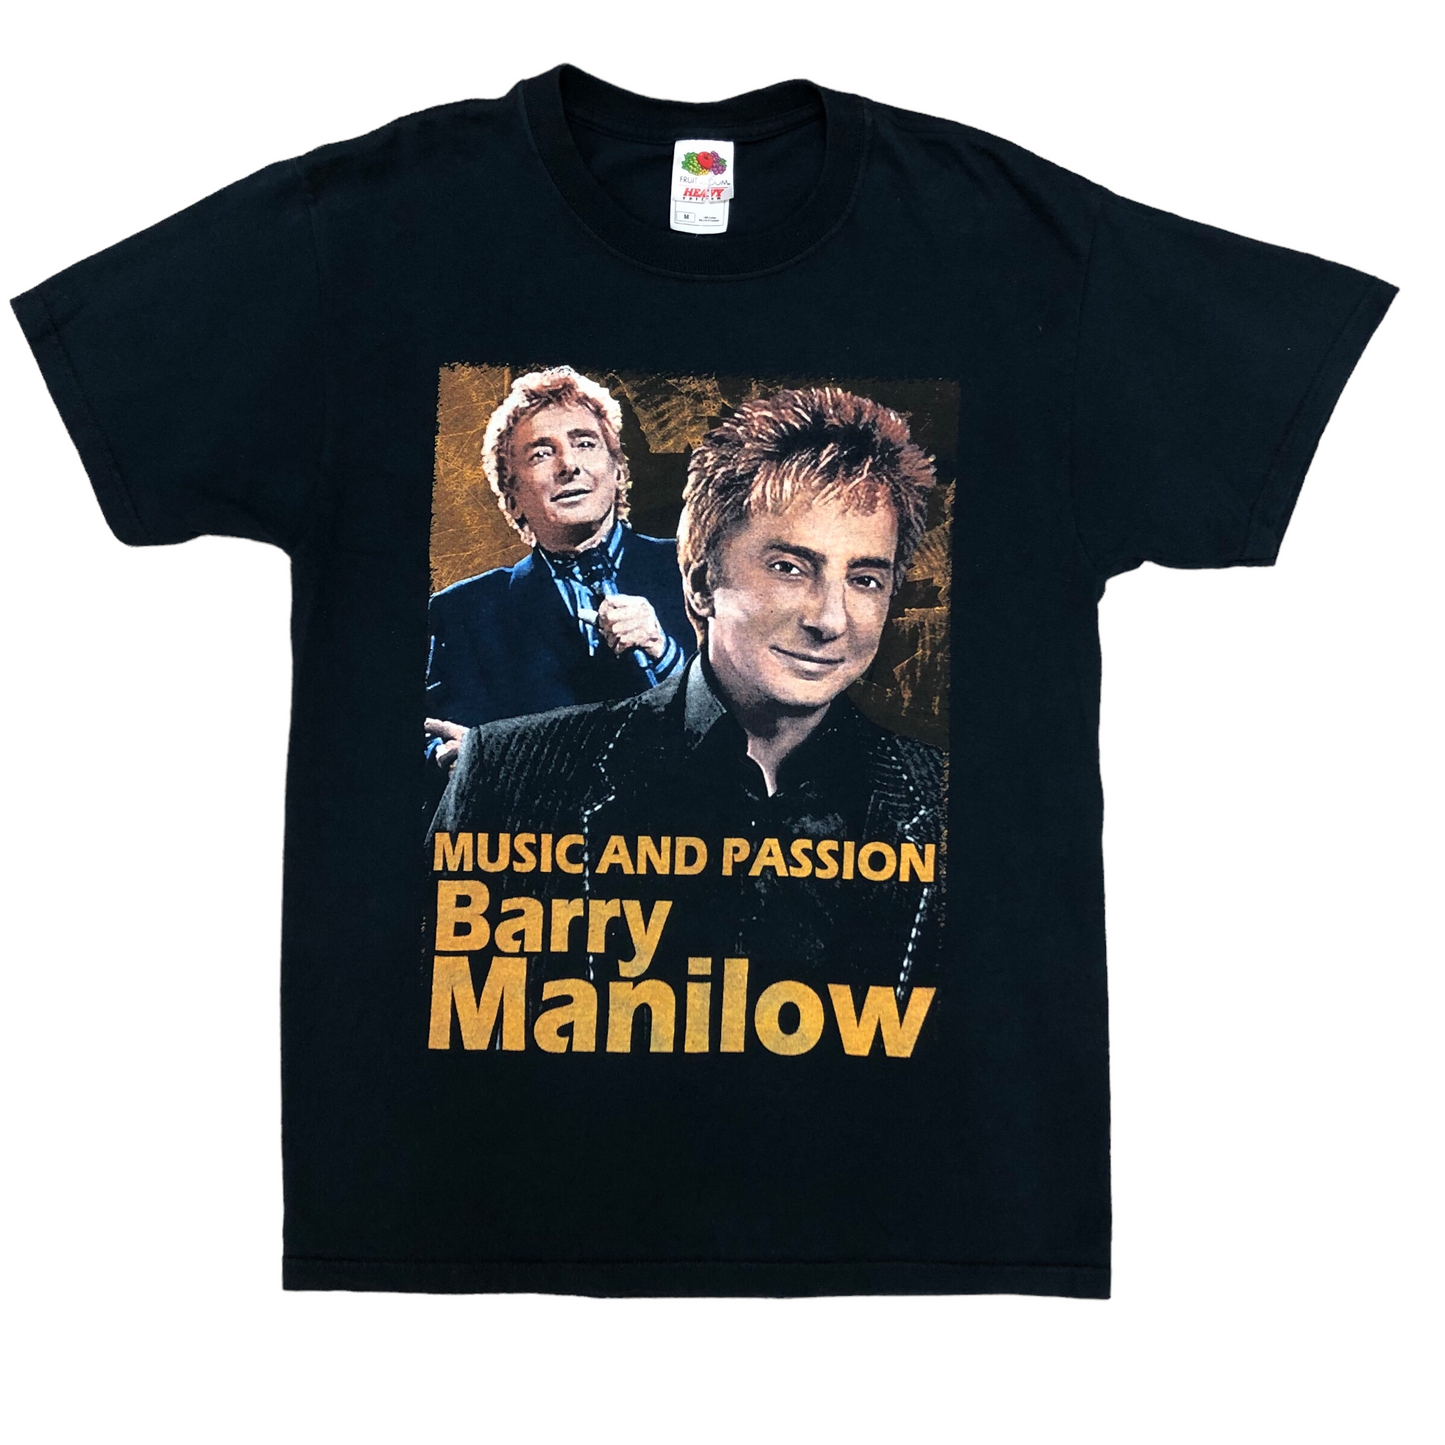 Y2K Barry Manilow Music And Passion Bootleg Style T-Shirt - Size Medium